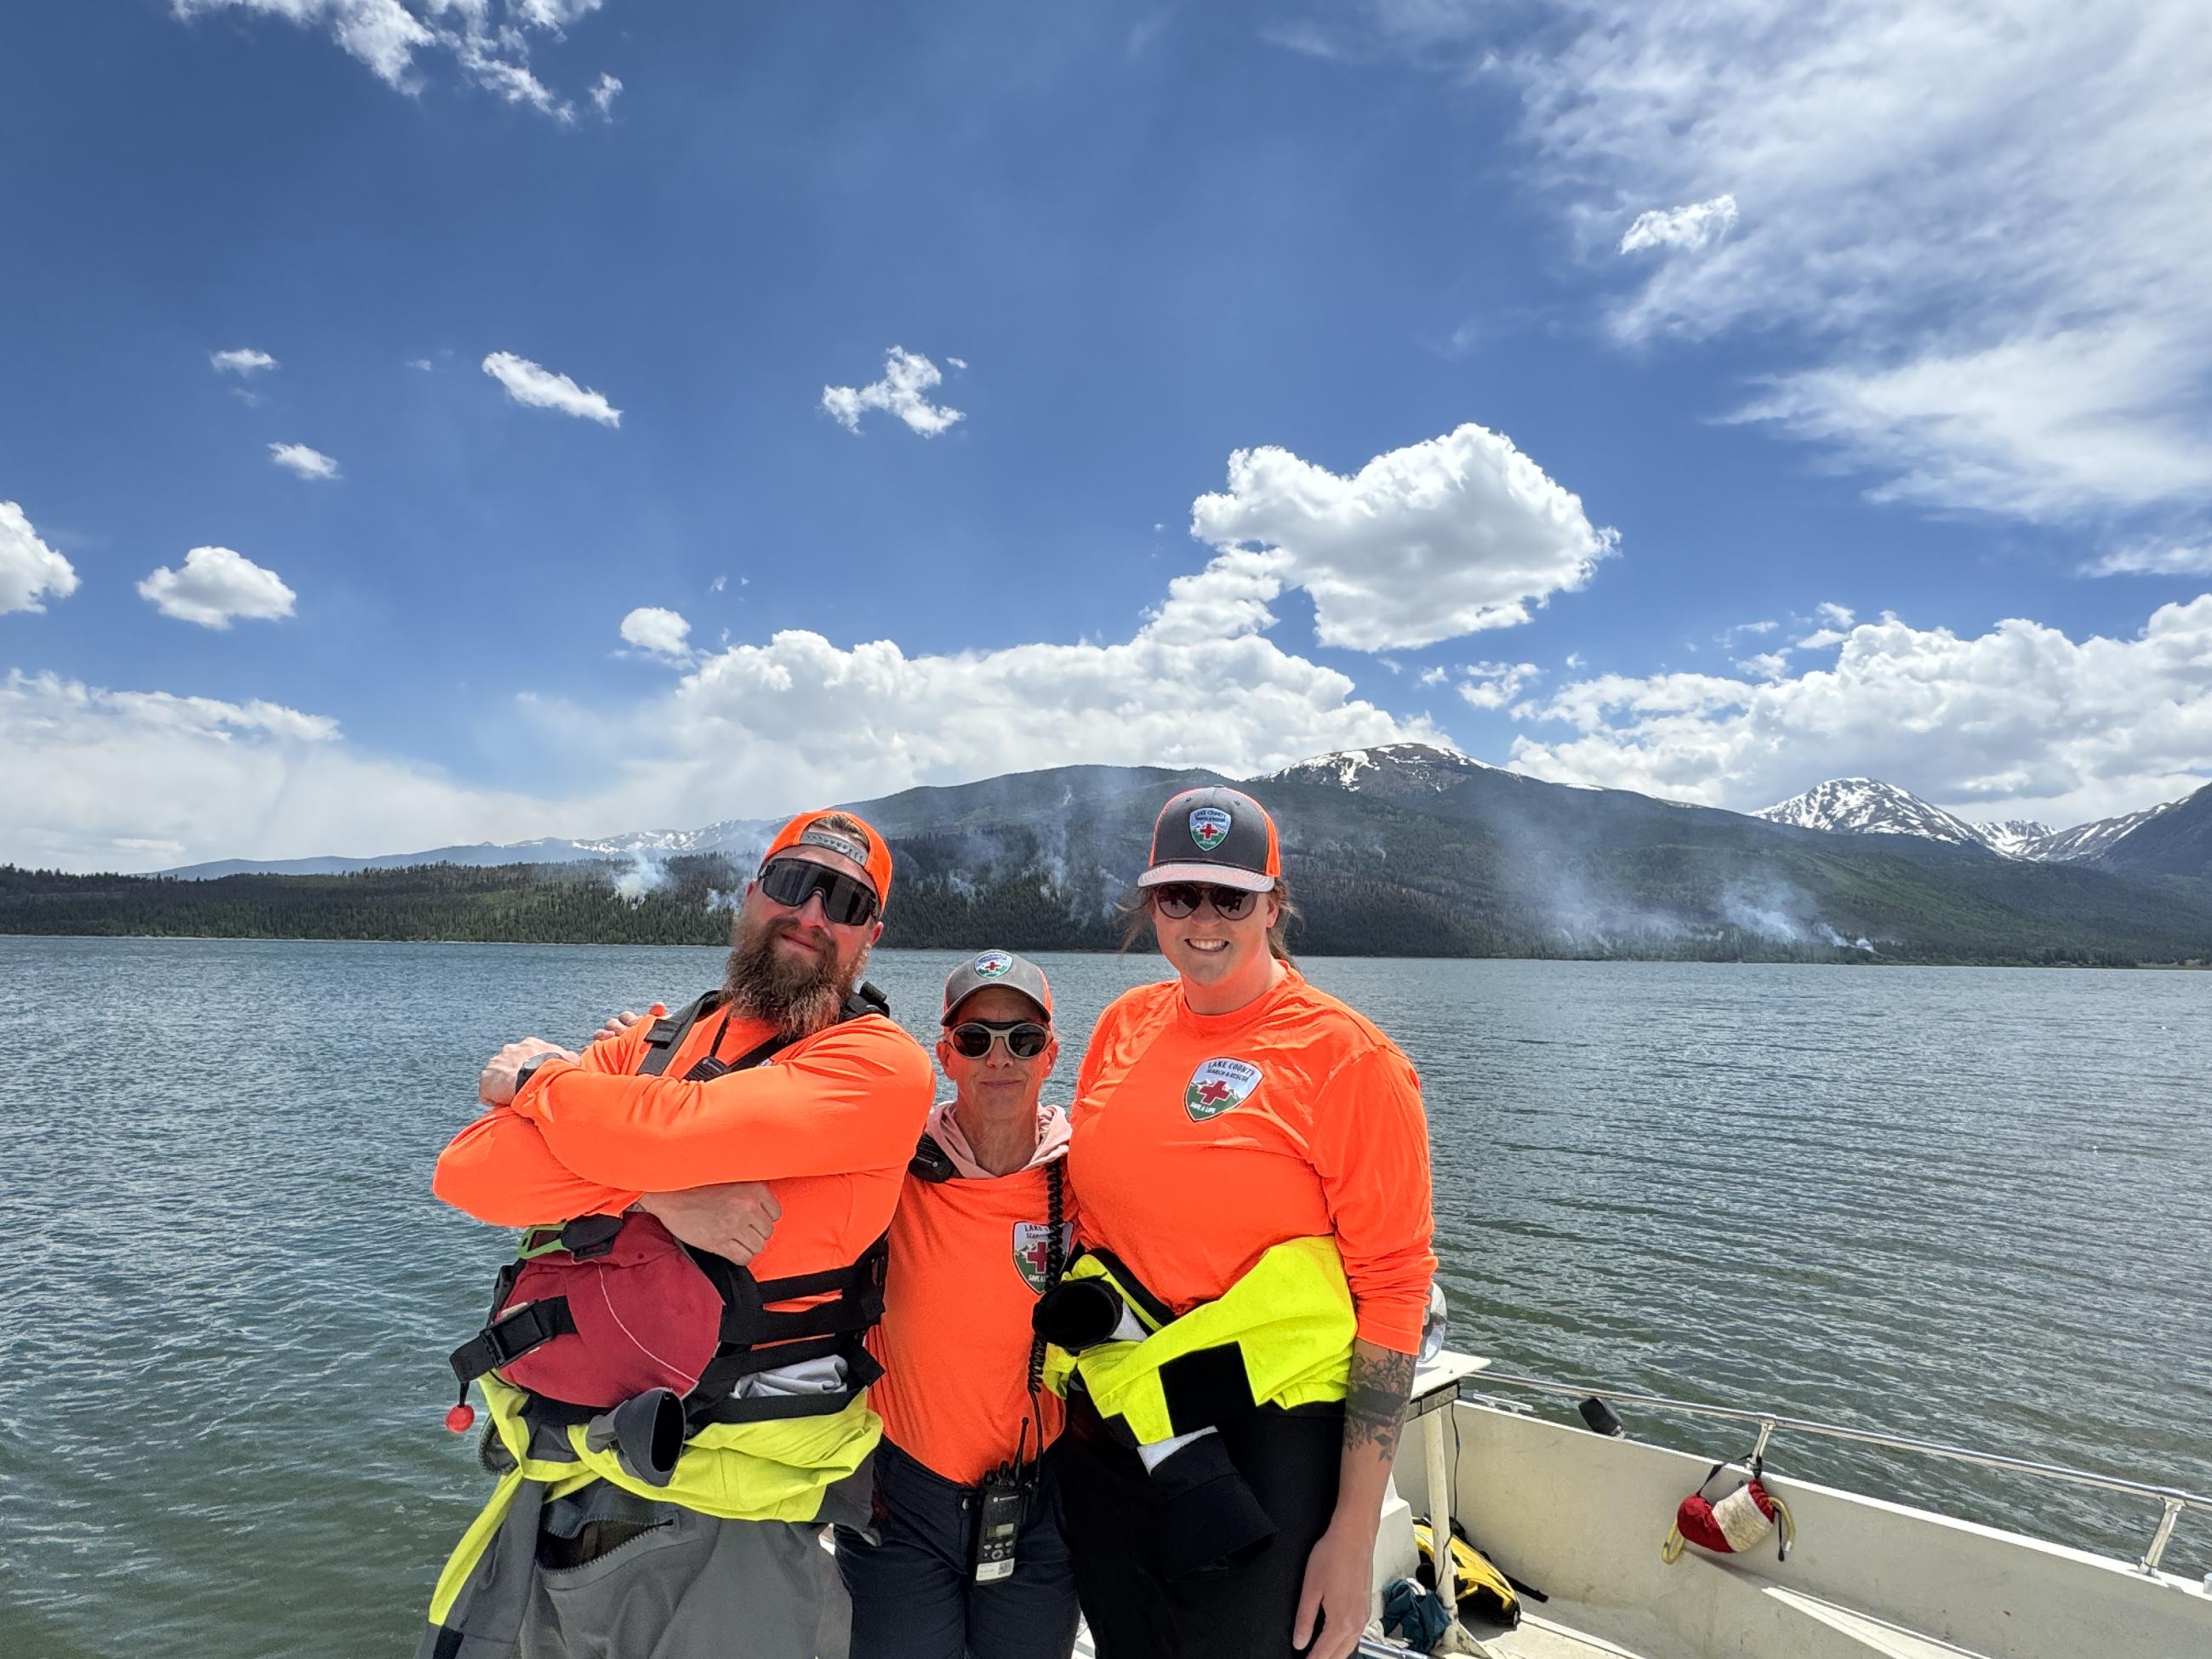 Three members of the Lake County Search and Rescue Team on a boat on Twin Lakes with the Interlaken Fire in the background.